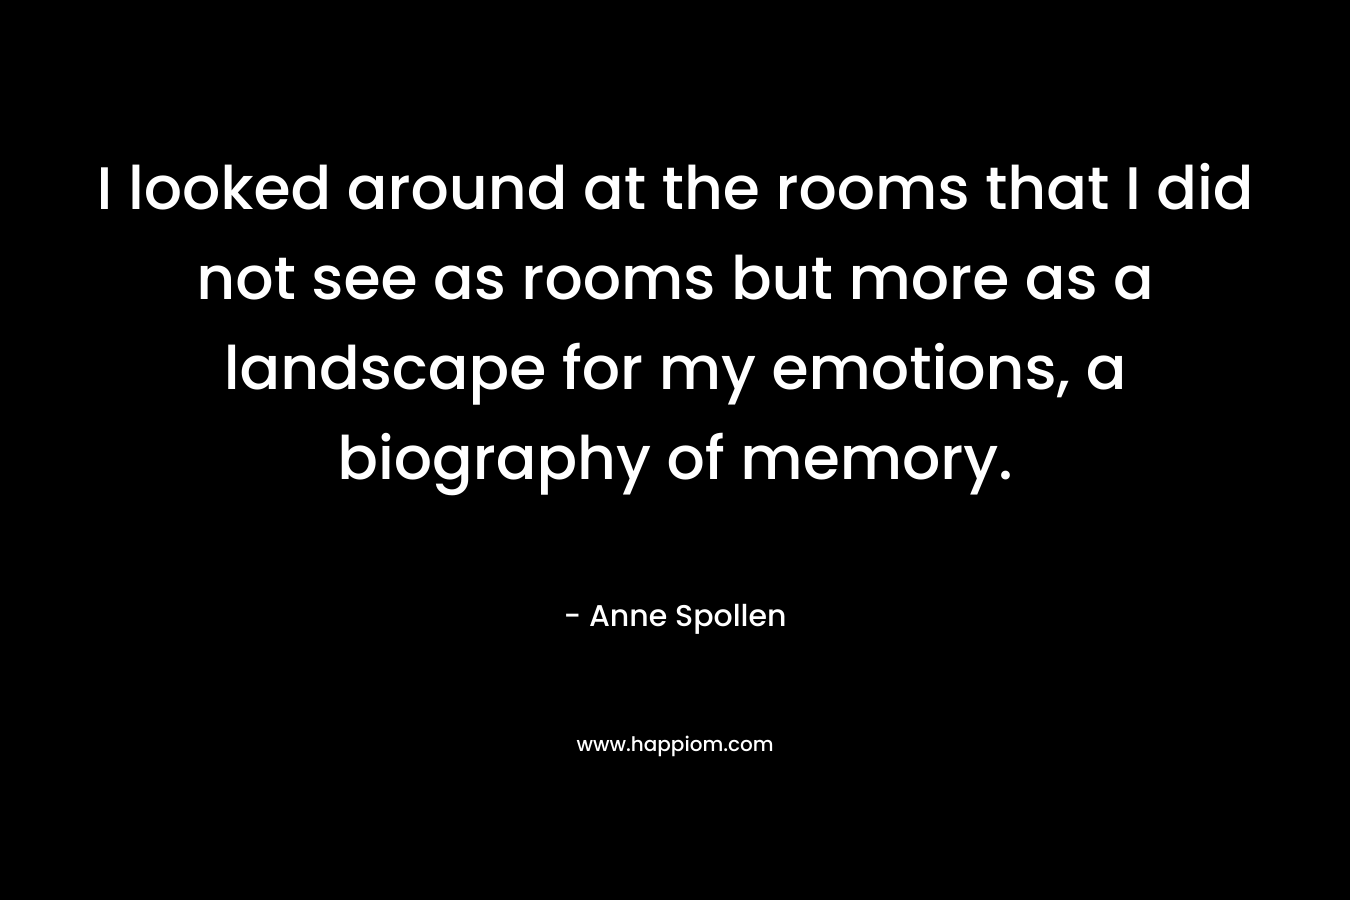 I looked around at the rooms that I did not see as rooms but more as a landscape for my emotions, a biography of memory.